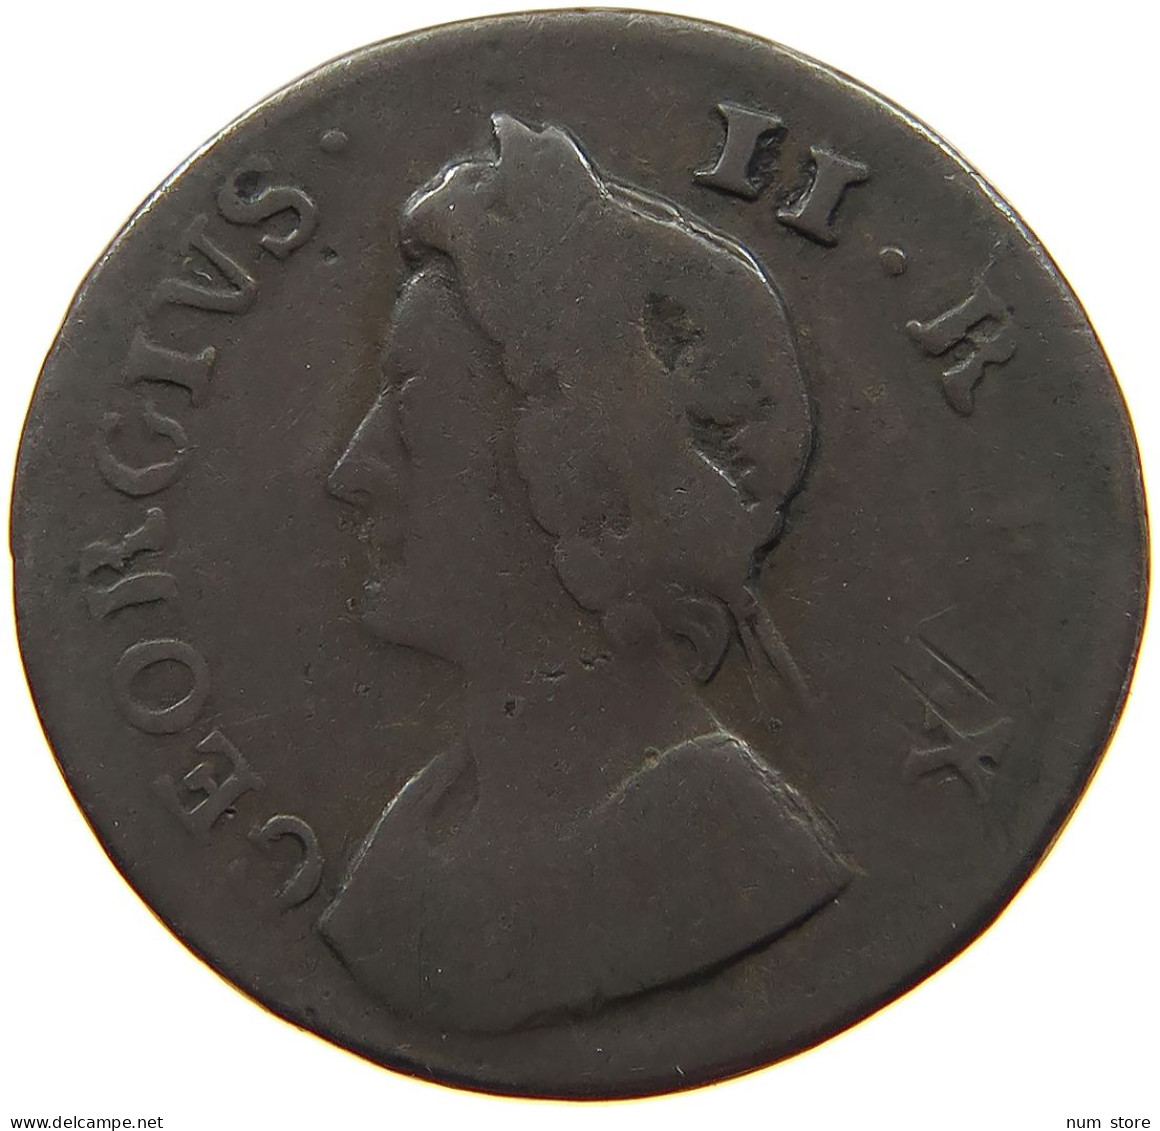 GREAT BRITAIN FARTHING 1737 George II. 1727-1760. #t149 0209 - A. 1 Farthing